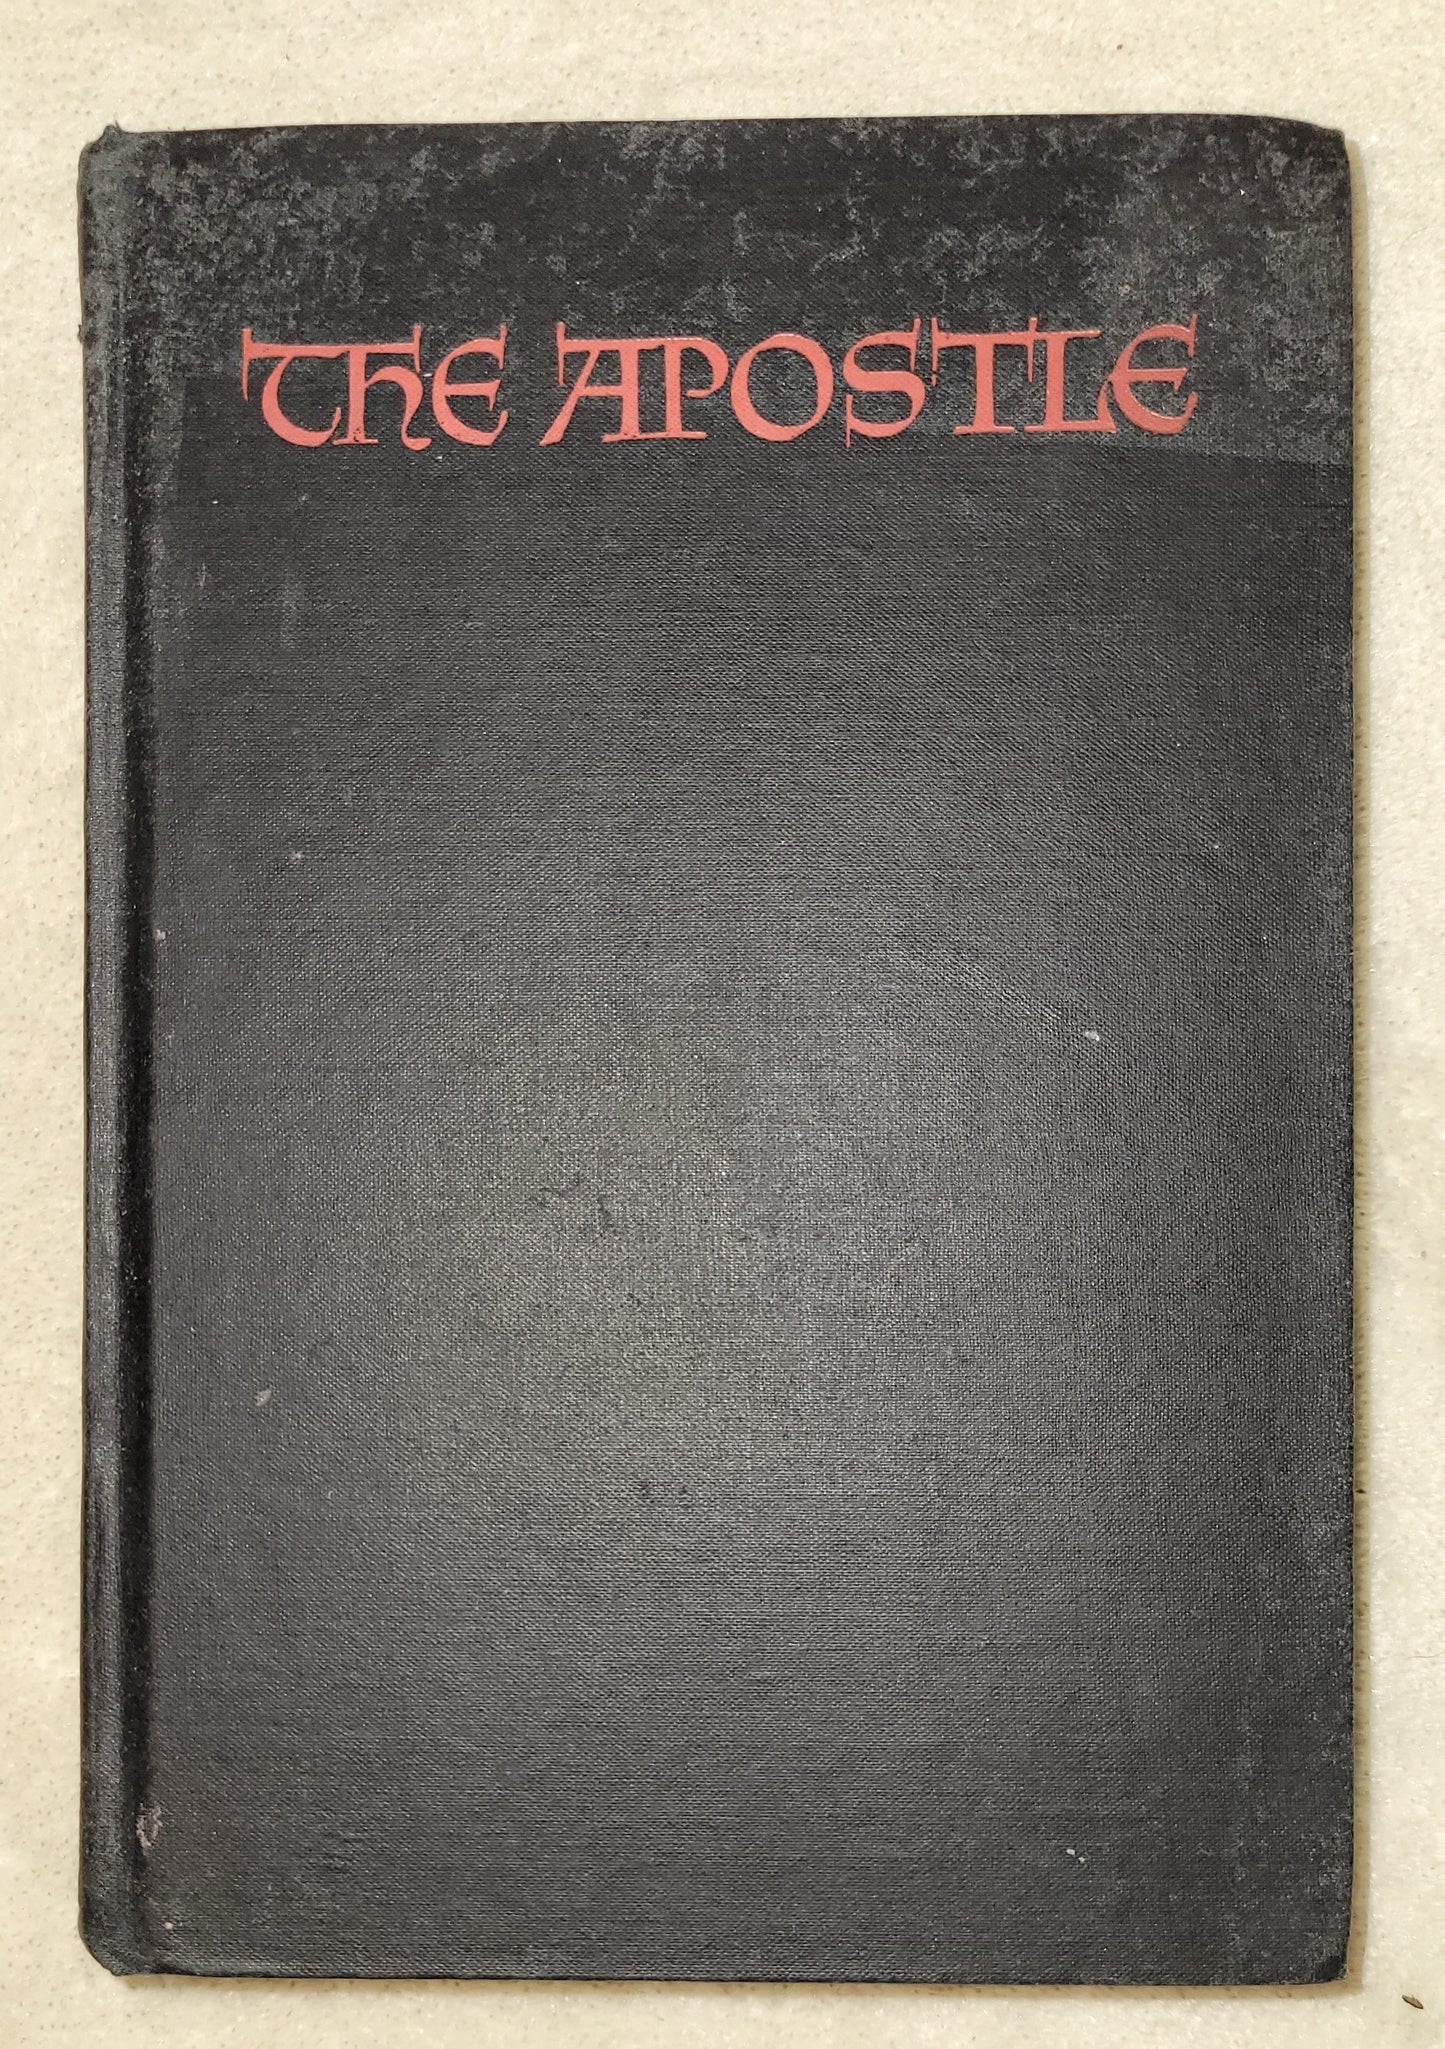 Vintage book for sale “The Apostle” by Sholem Asch published by H. Wolff Book Mfg. Company, 1943. Front cover.